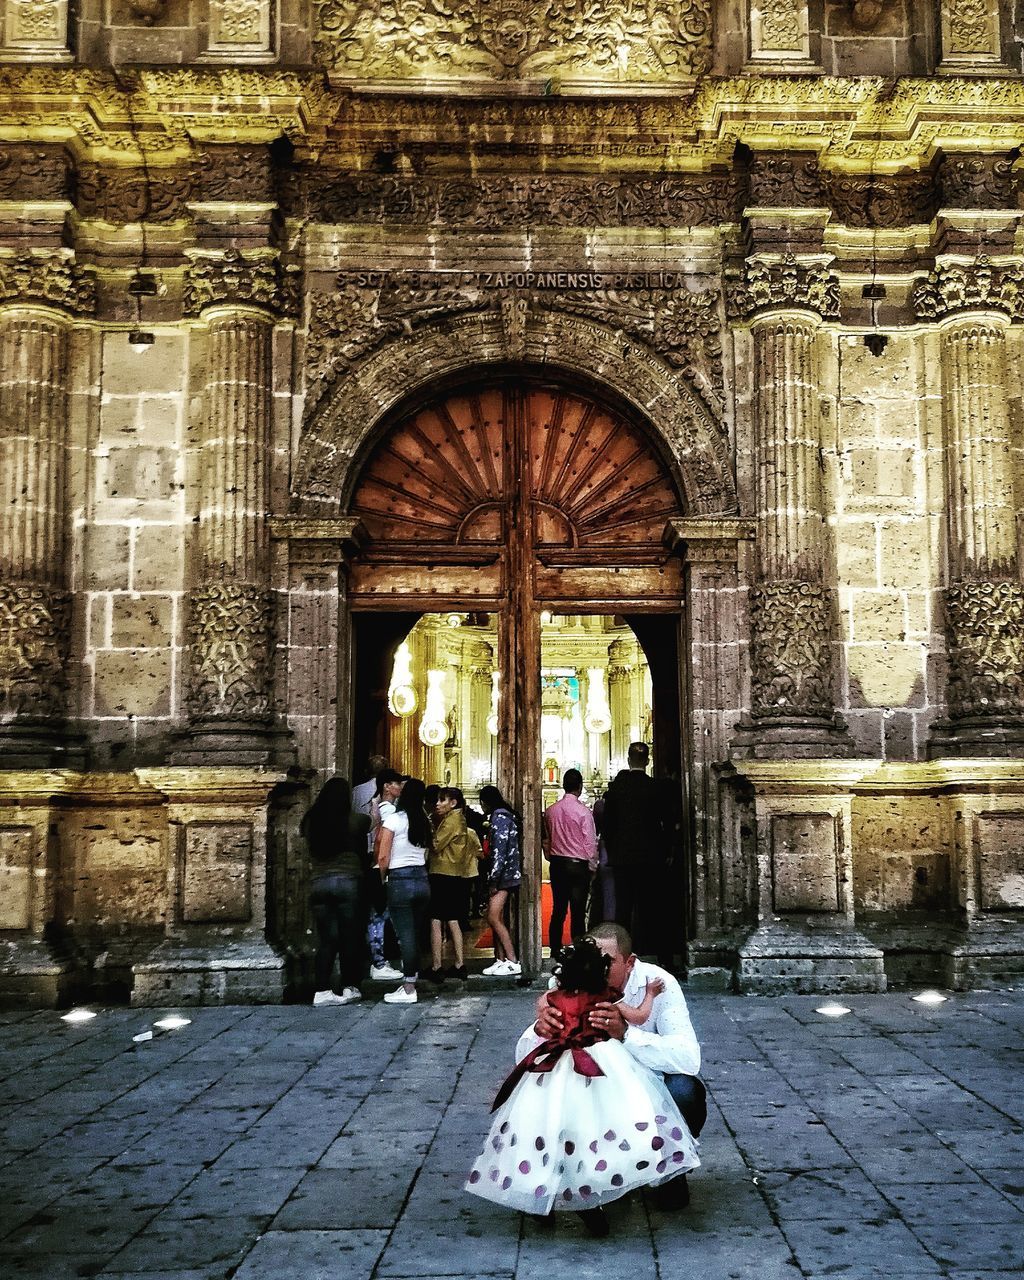 PEOPLE IN FRONT OF HISTORICAL BUILDING